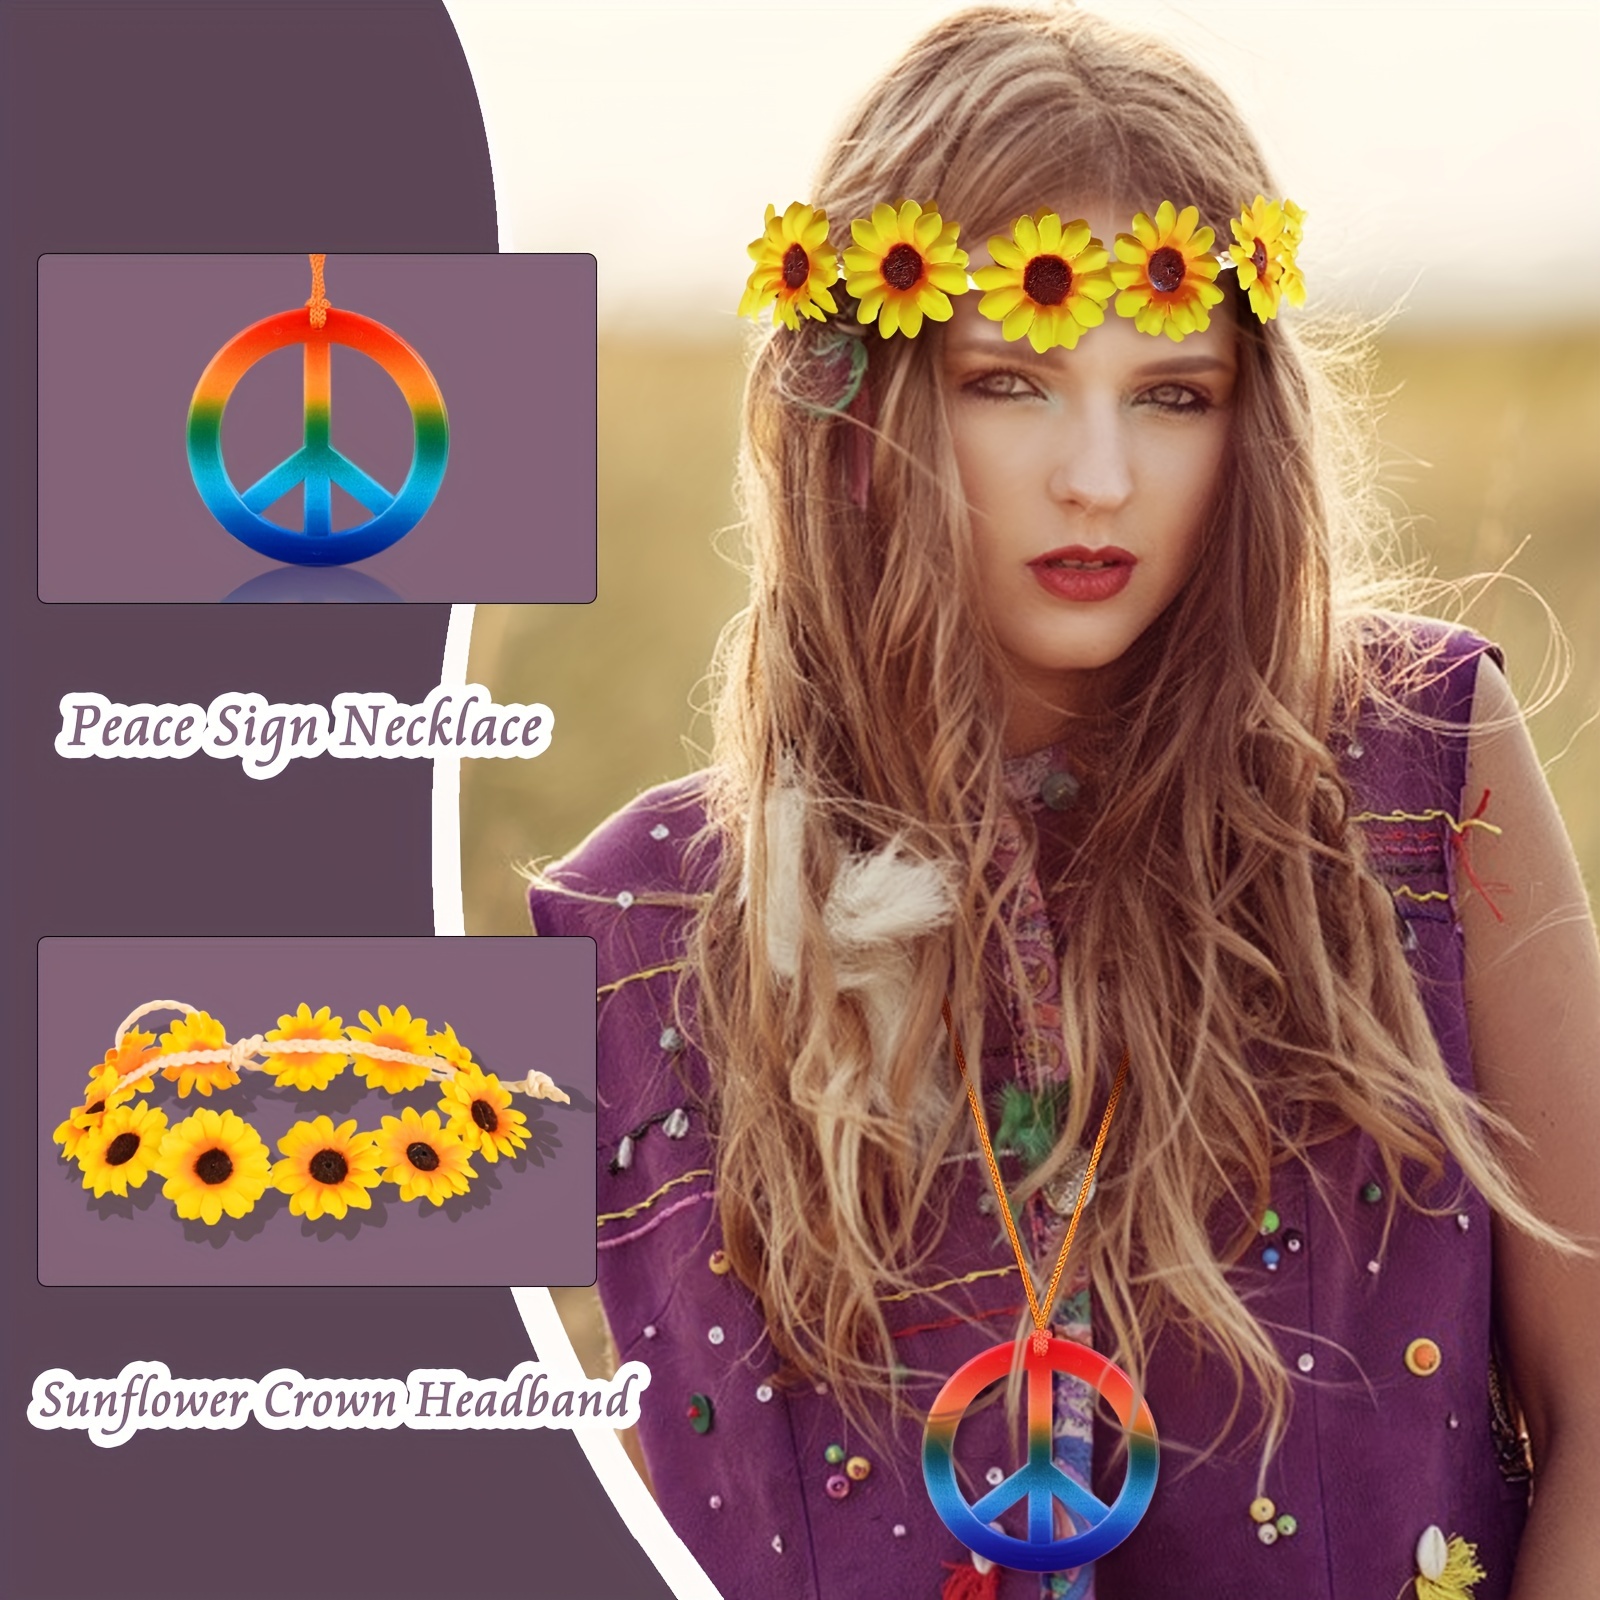 6 Pieces Hippie Costume Accessories Set 60s 70s Tie Dye Headband Sunflower  Crown Hippie Sunglasses Rainbow Peace Sign Necklace And Earrings For Women  Men Hippie Party Supplies